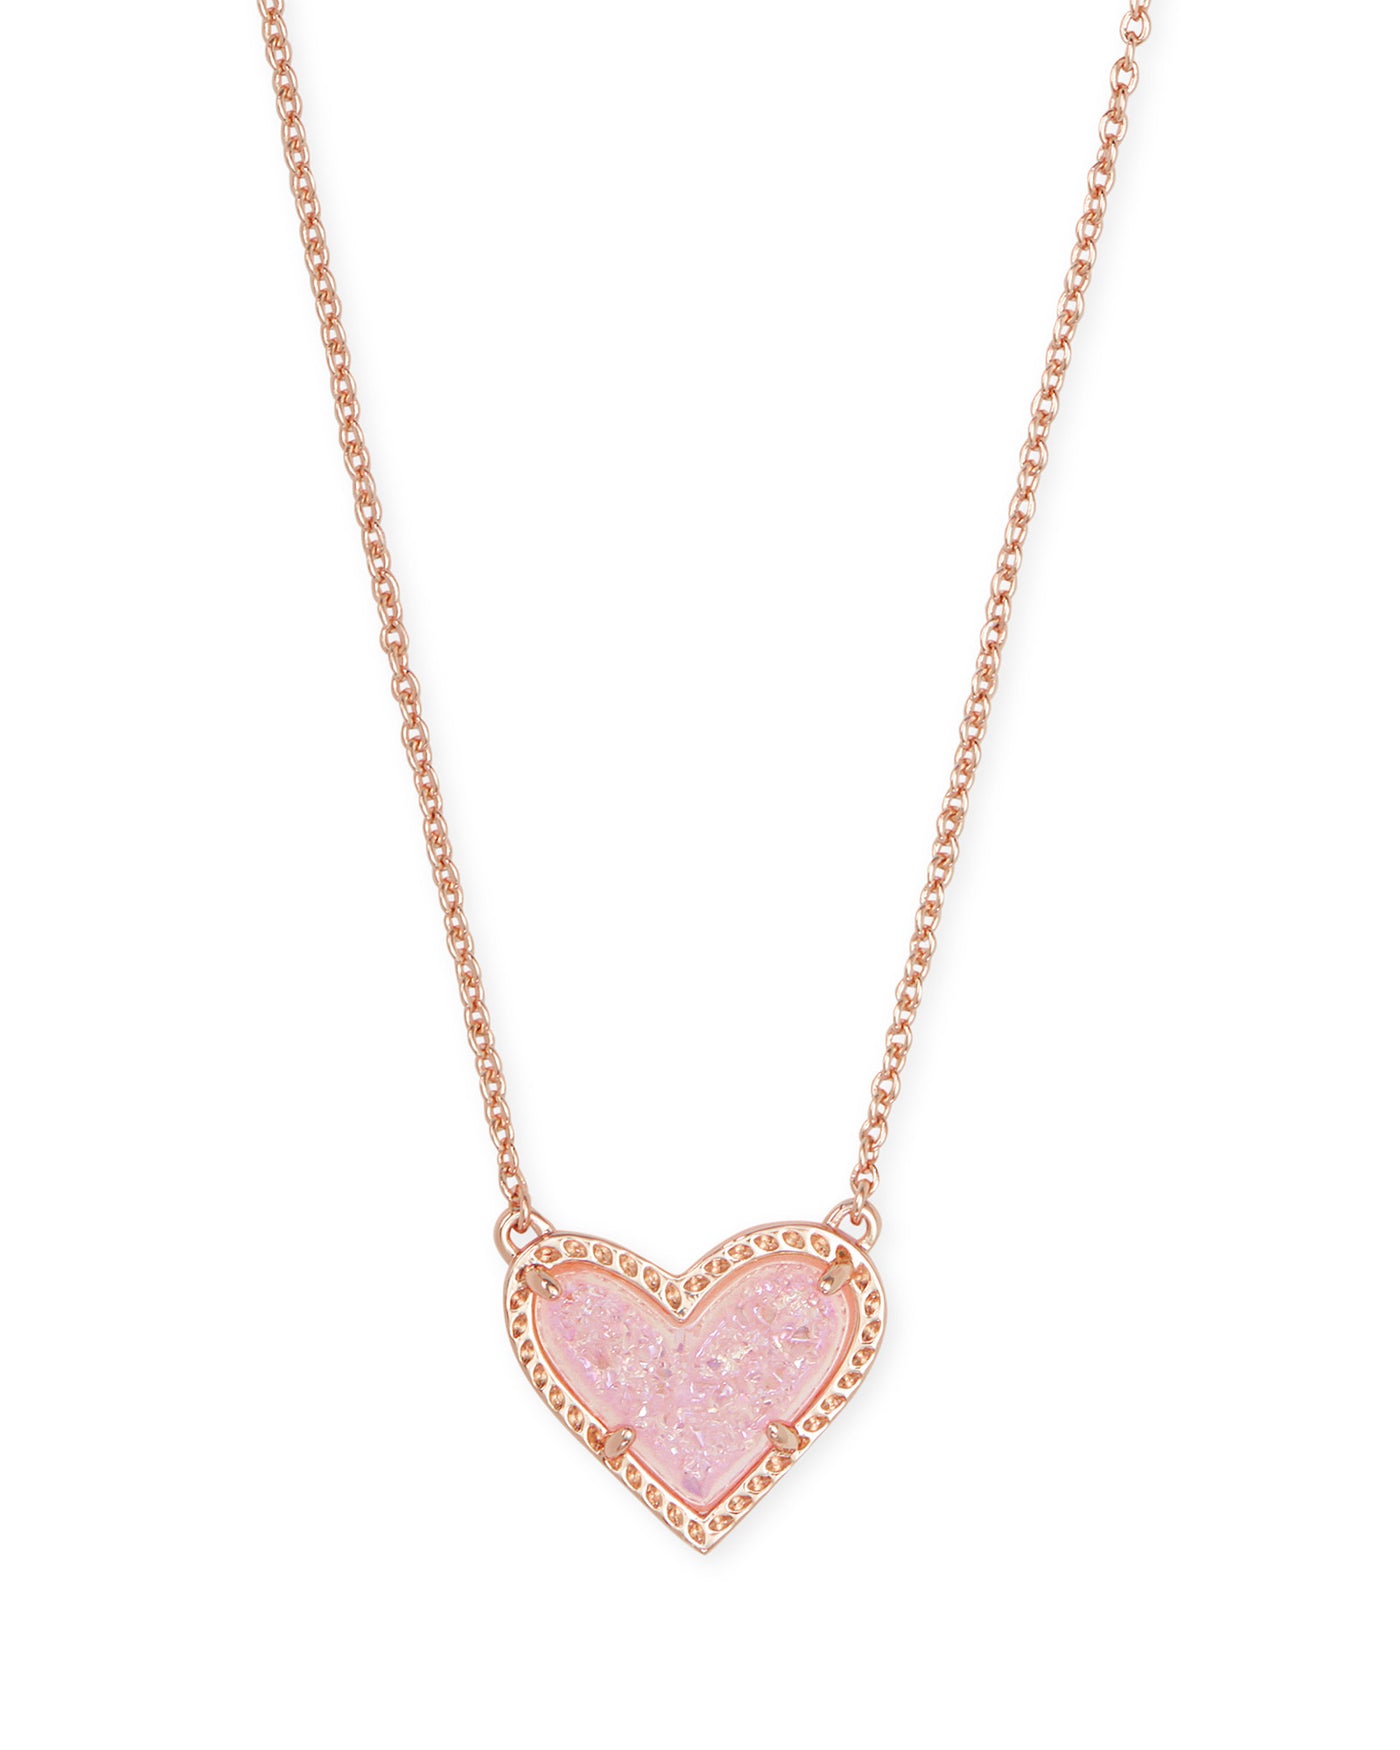 Kendra Scott Ari Heart Pendant Necklace - Rose Gold Light Pink Drusy Heart-Necklaces-Kendra Scott-Market Street Nest, Fashionable Clothing, Shoes and Home Décor Located in Mabank, TX